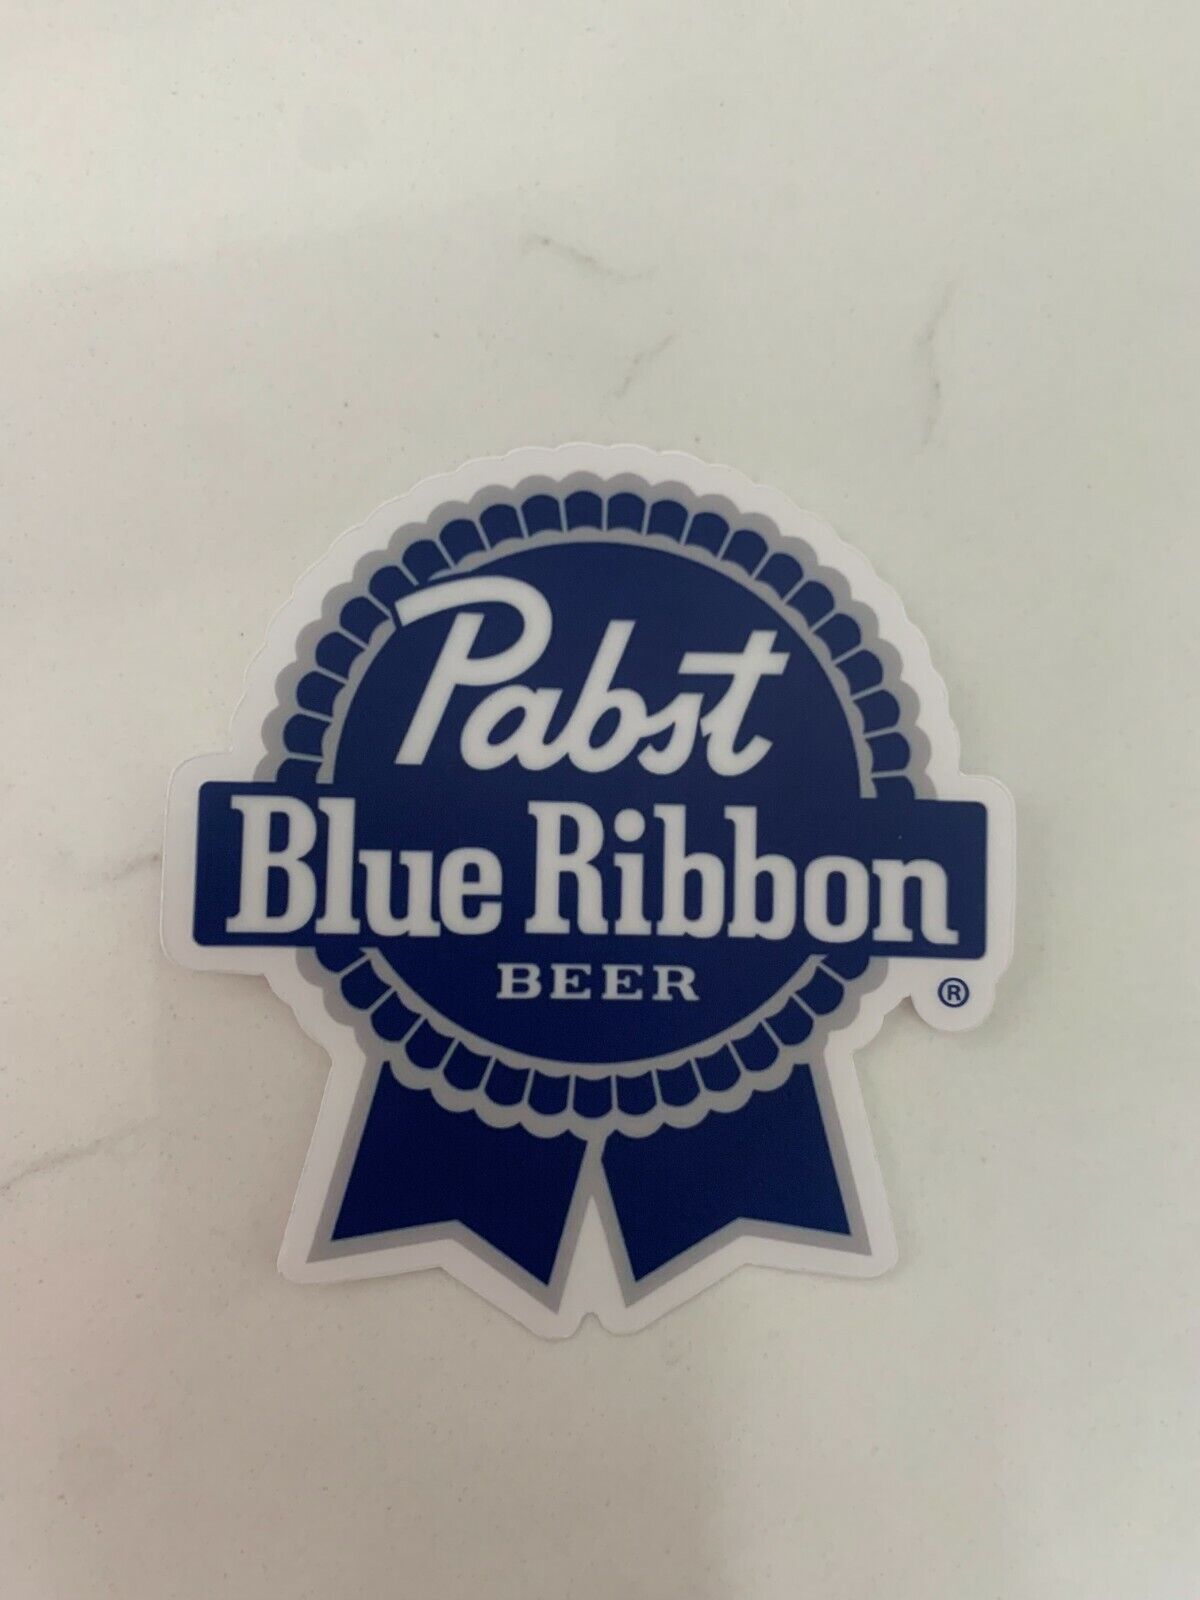 PBR Pabst Blue Ribbon Beer Premium Quality Vinyl 2 Sticker Pack Decal 3x2 